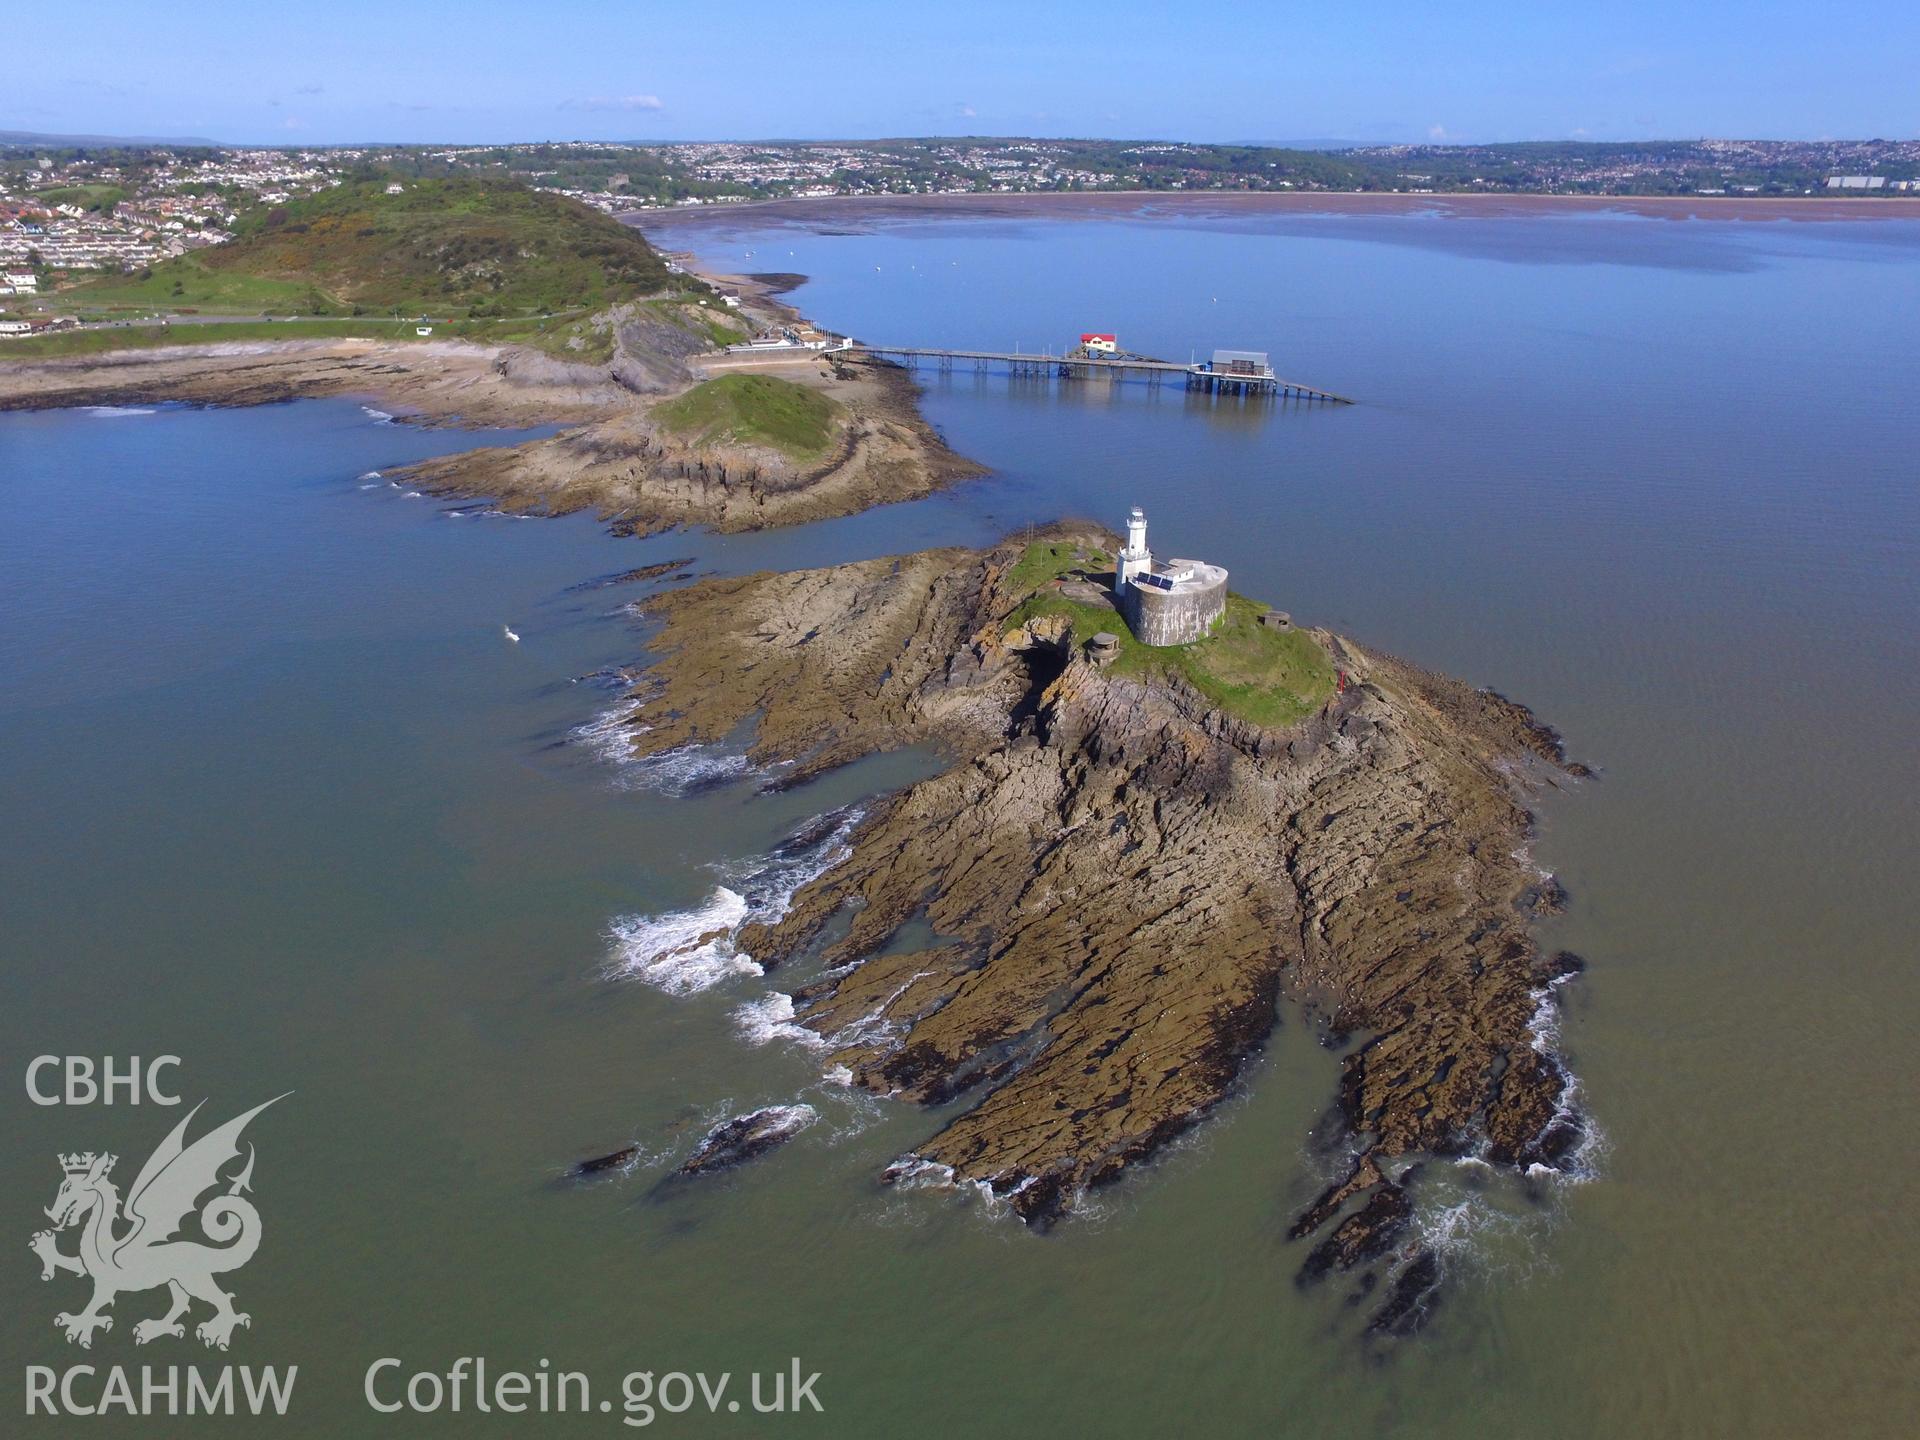 Colour photo showing aerial view of the lighthouse and pier at Mumbles, taken by Paul R. Davis, 13th May 2018.